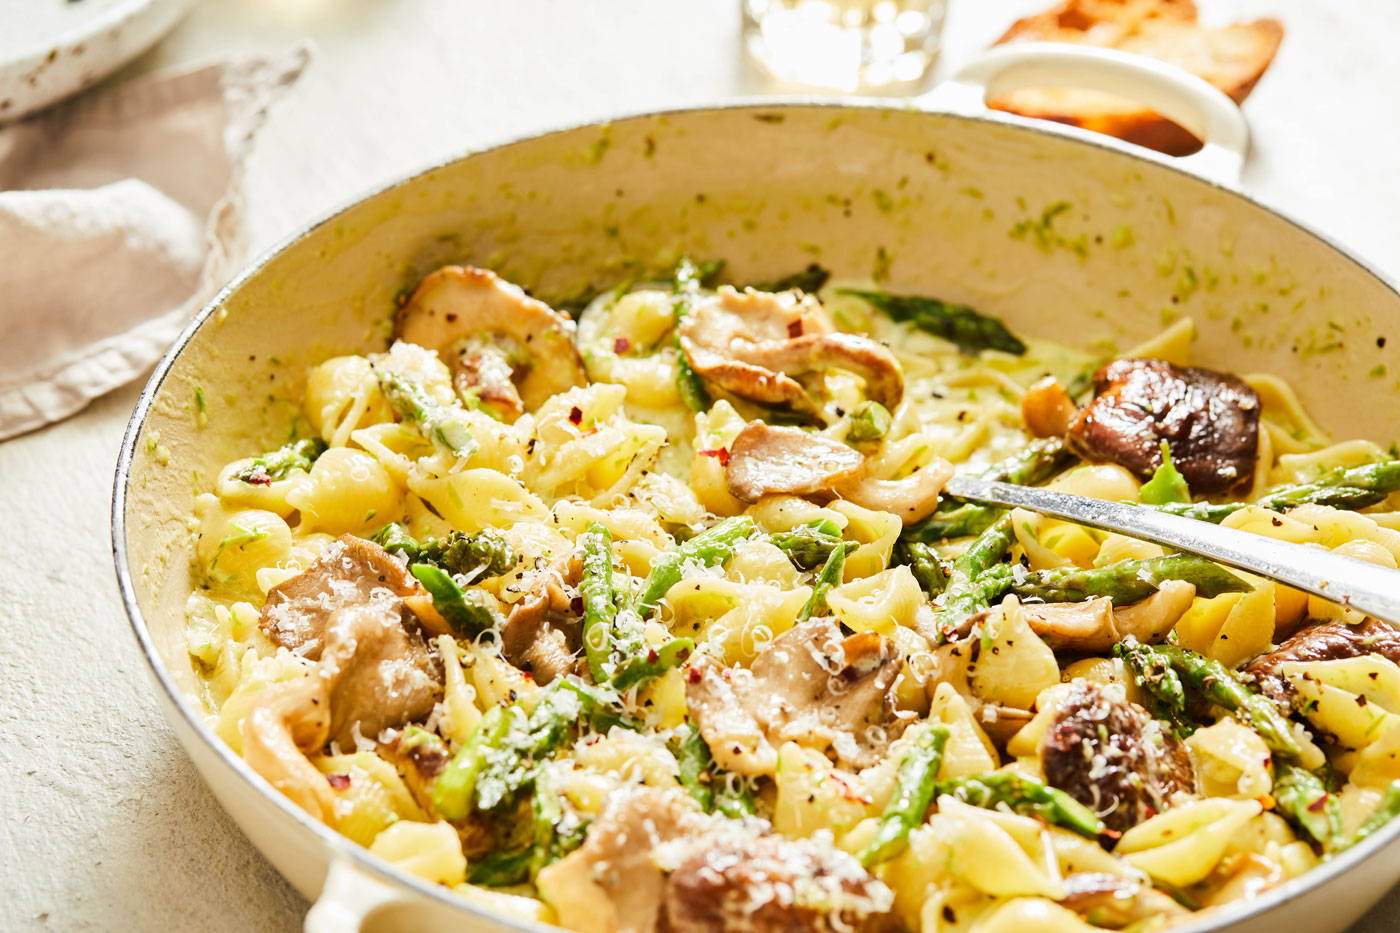 Shell pasta with mushrooms and asparagus in a creamy sauce.